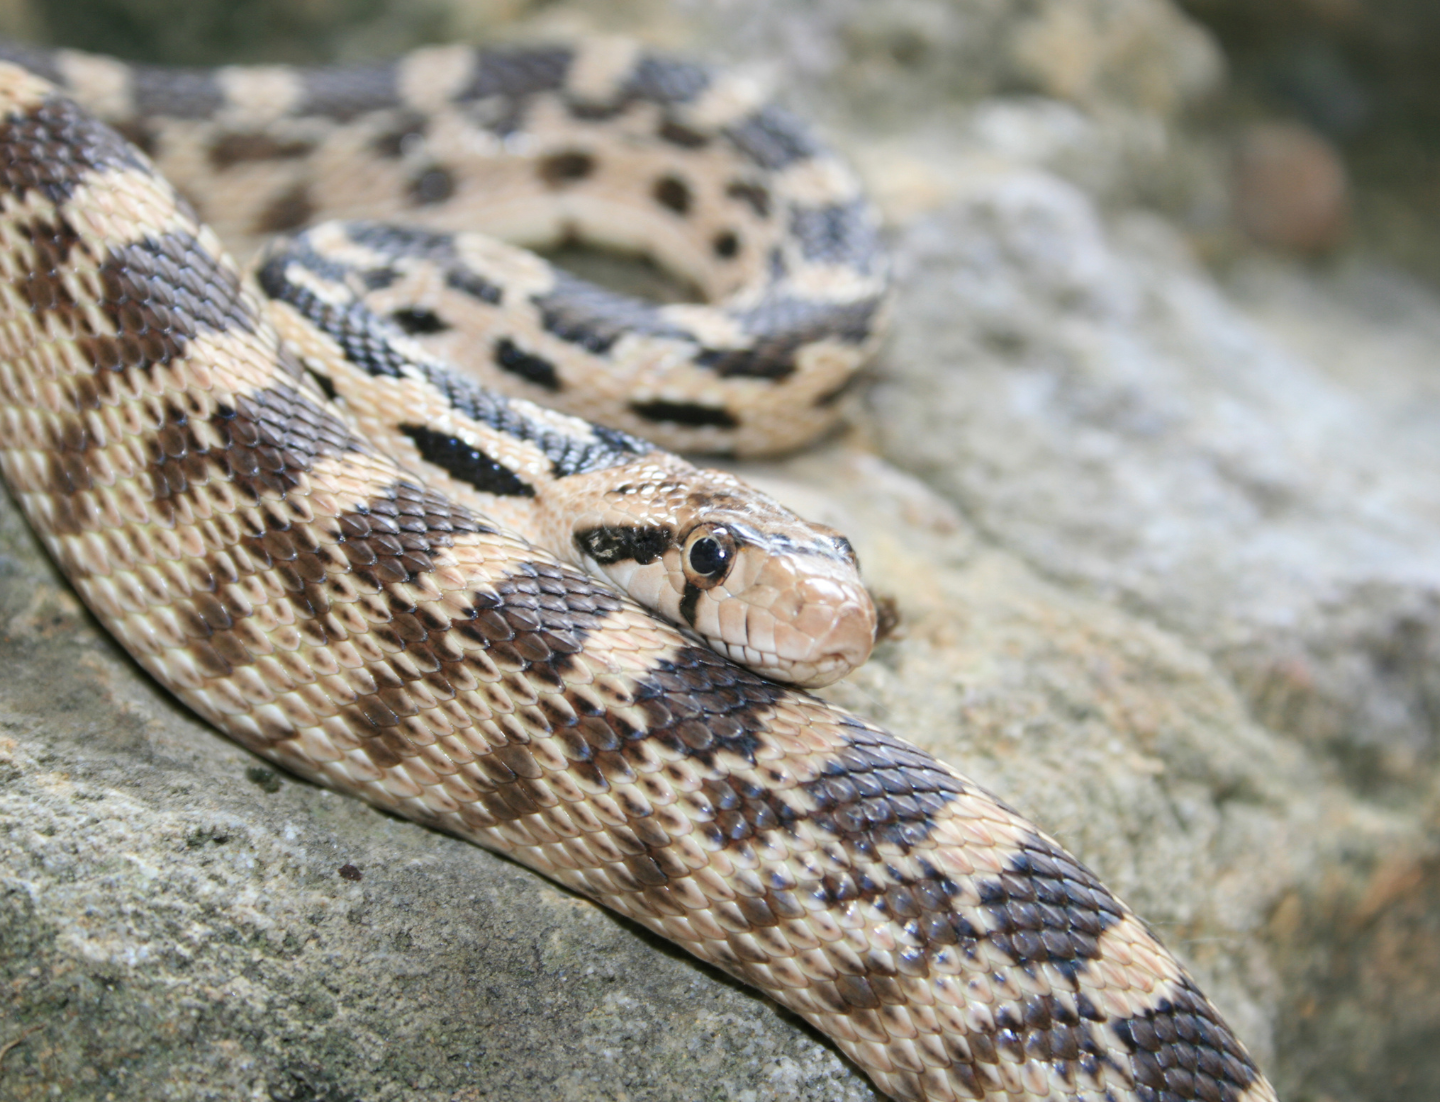 A gopher snake looks into the camera as it rests its head on part of its body.